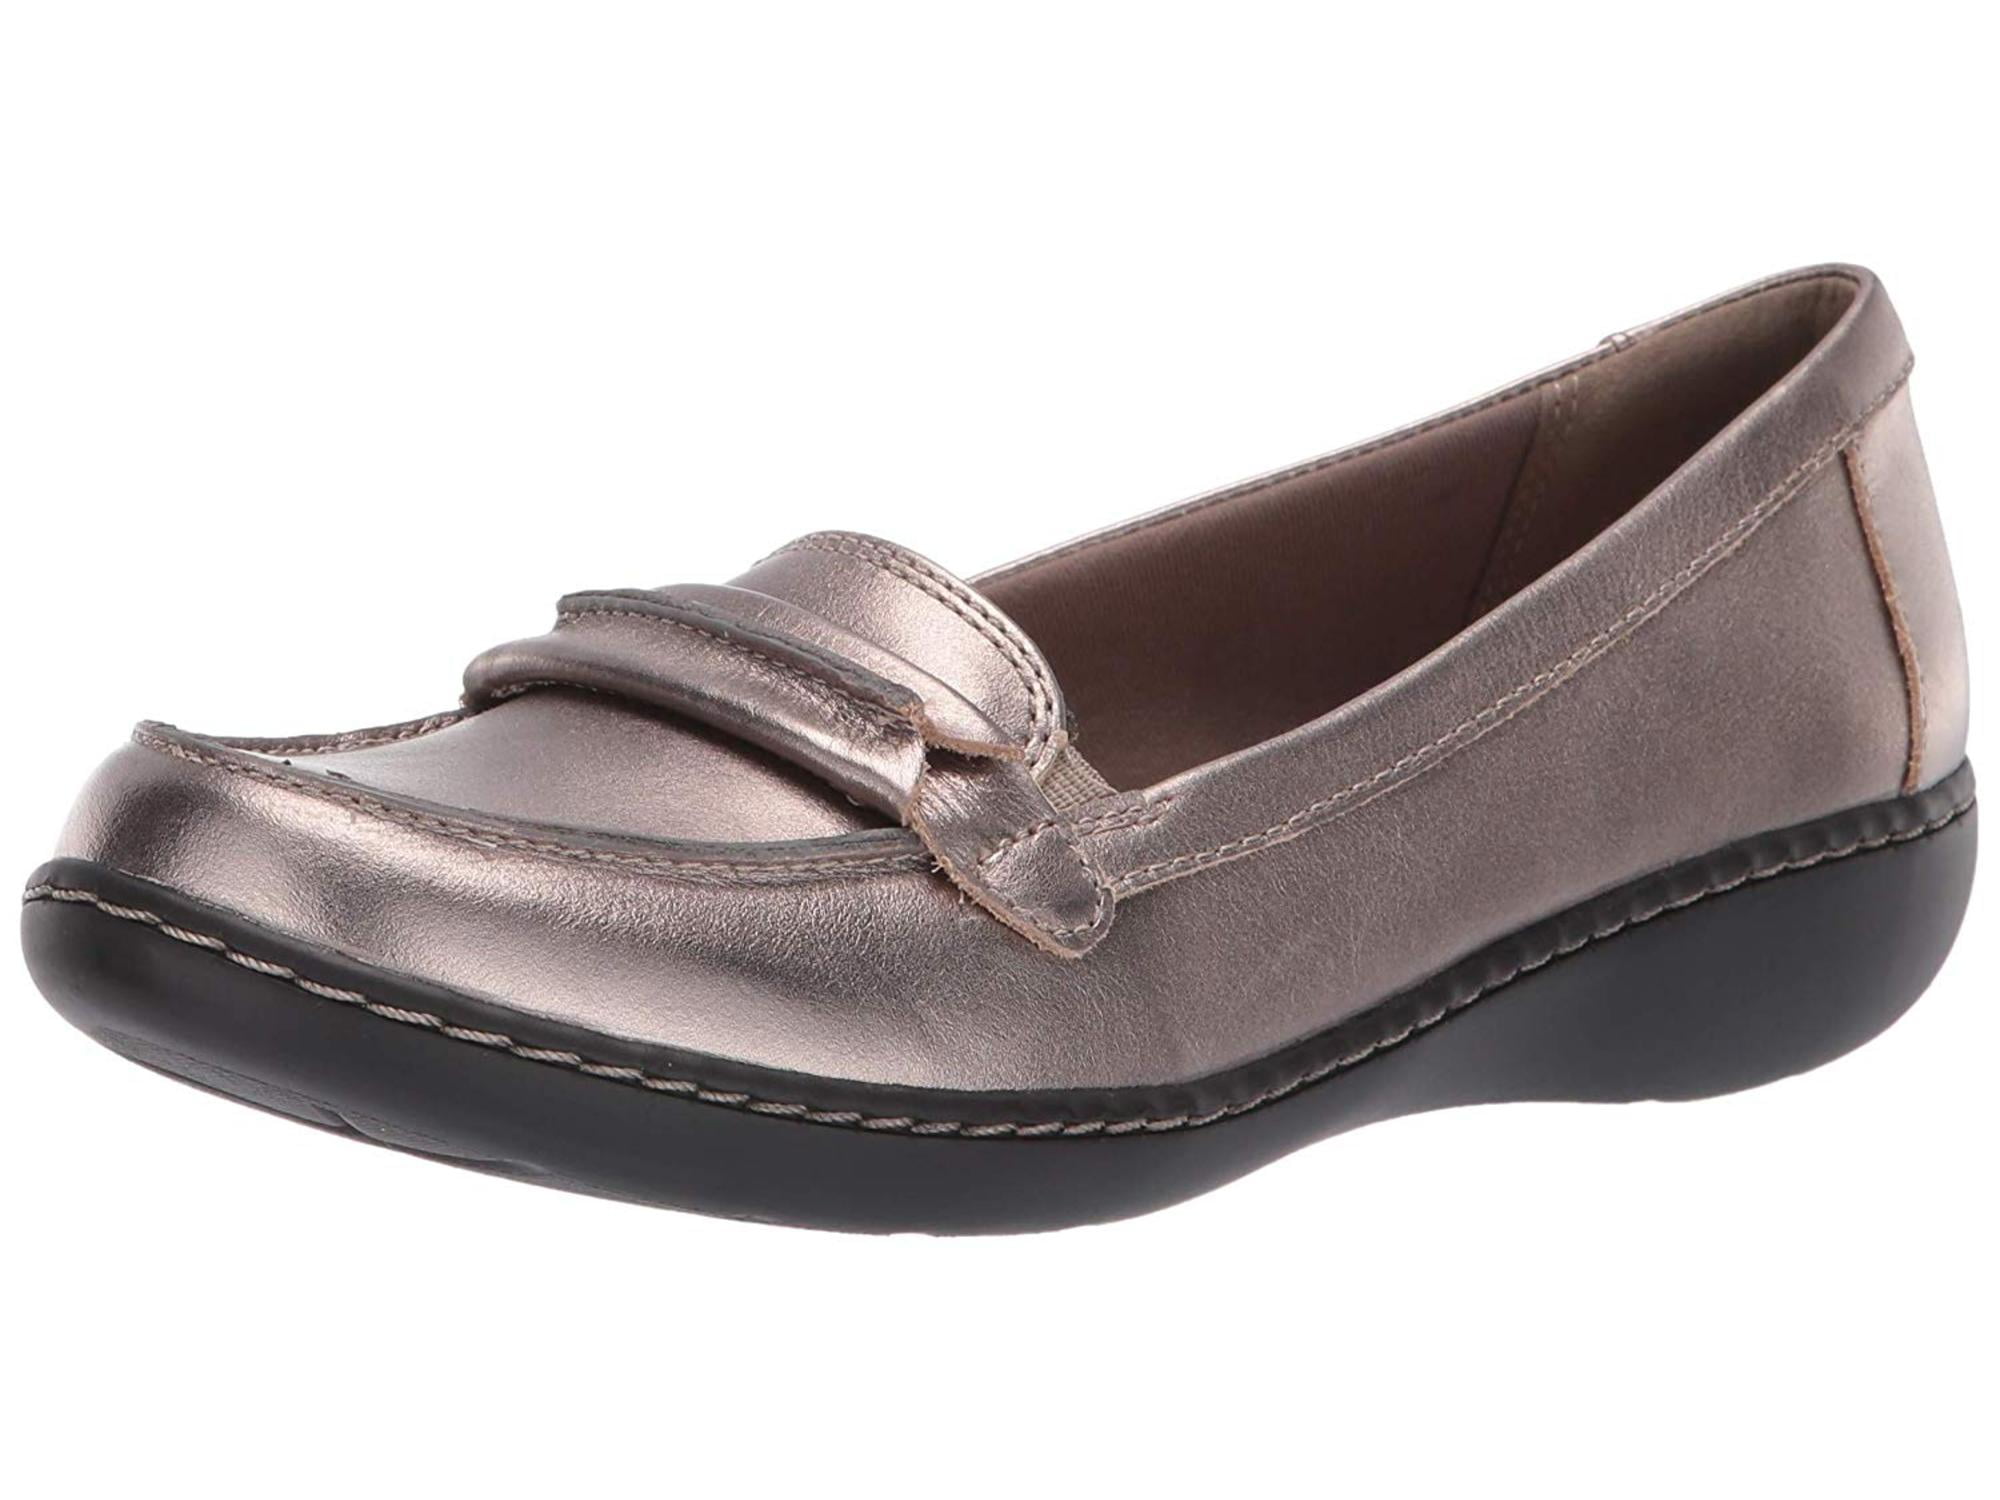 Clarks Womens Ashland Lily Loafer Shoes 